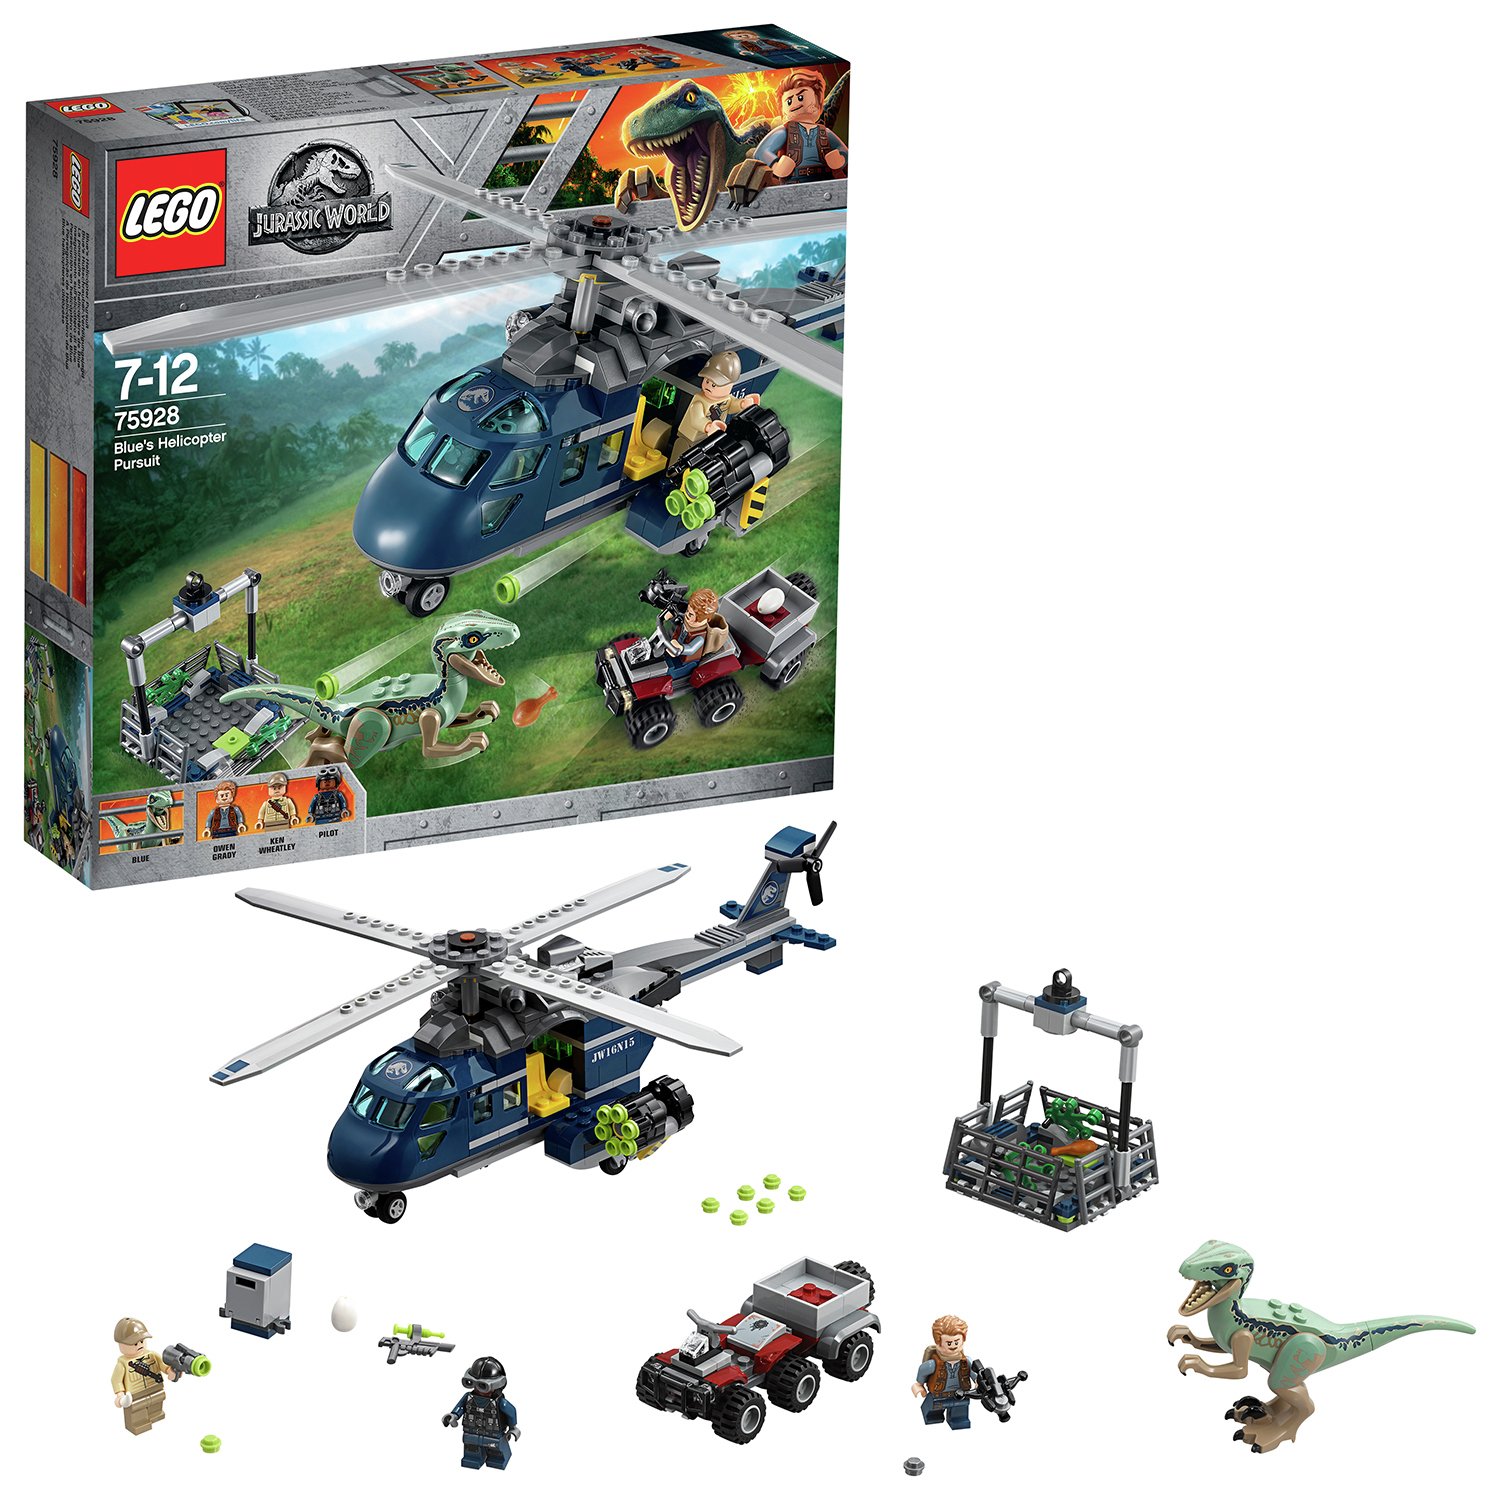 LEGO Jurassic World Blue's Helicopter Pursuit Toy - 75928